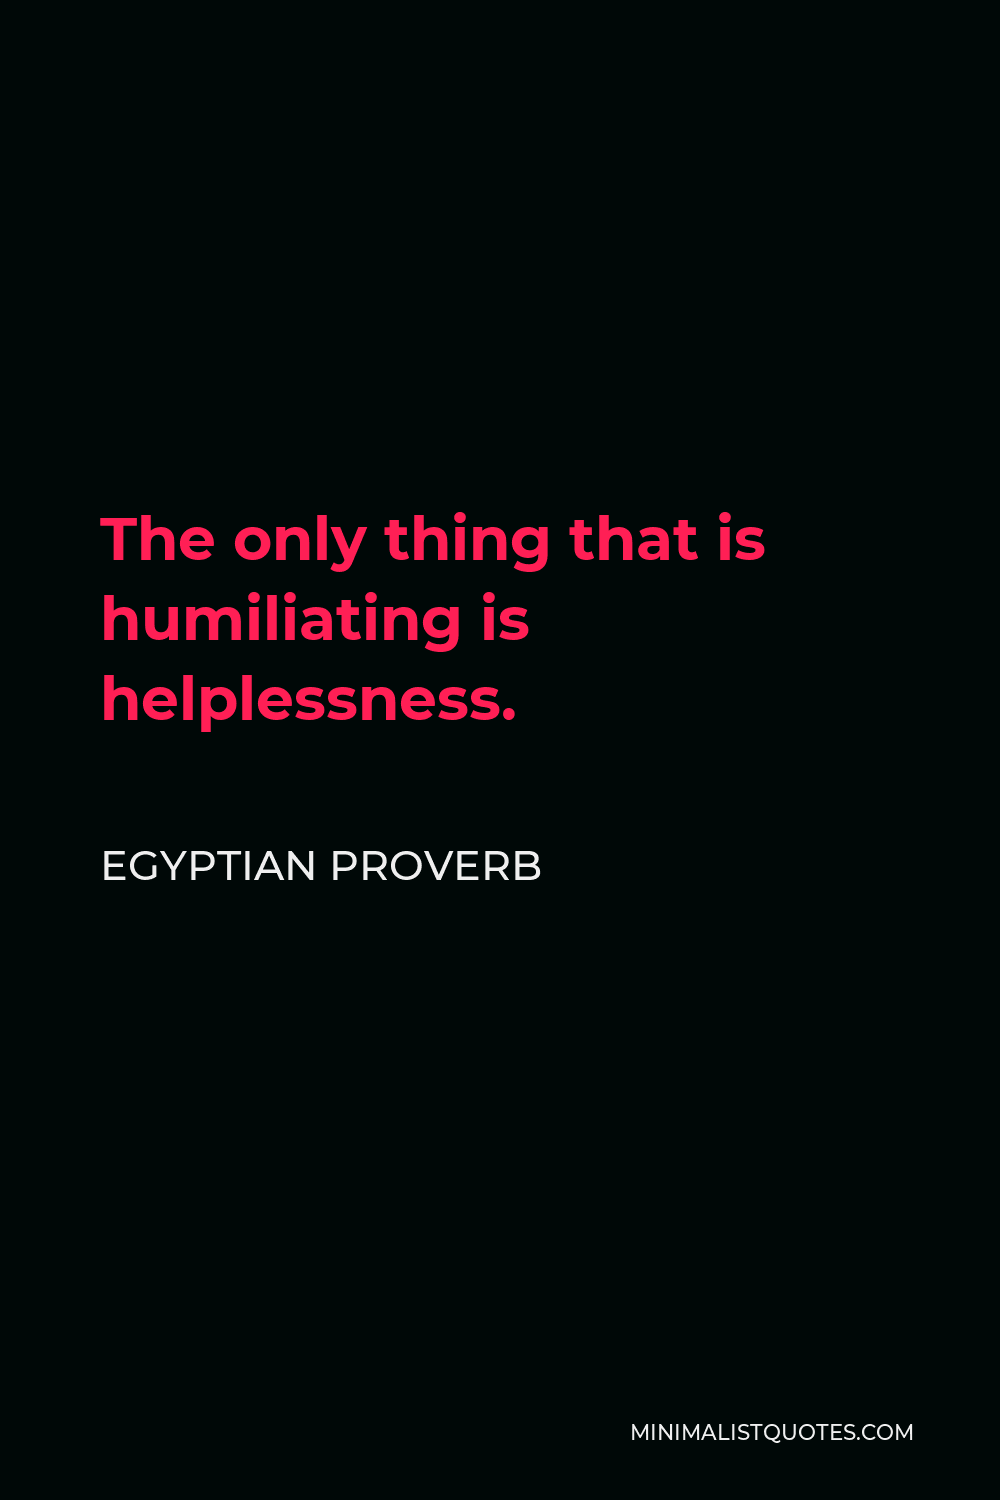 Egyptian Proverb Quote - The only thing that is humiliating is helplessness.